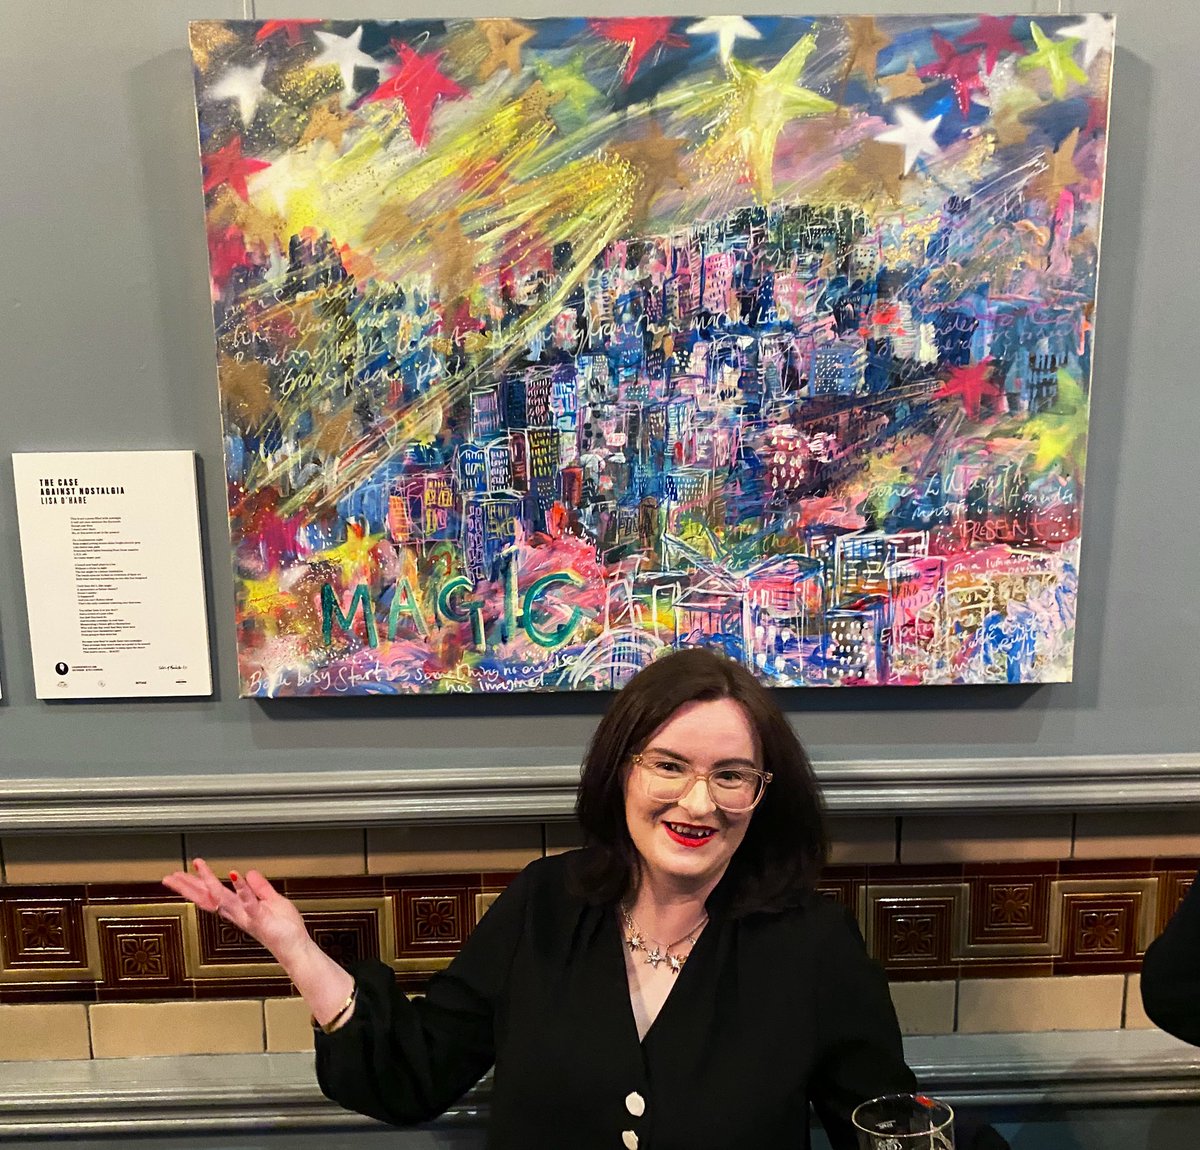 My face when I met the painting made in response to a poem I wrote about Manchester.. a poem dedicated to independent artists and the venues that allow them to make magic happen in real time… art by Emma Evans .. now on display at Refuge at the Kimpton Clocktower until June